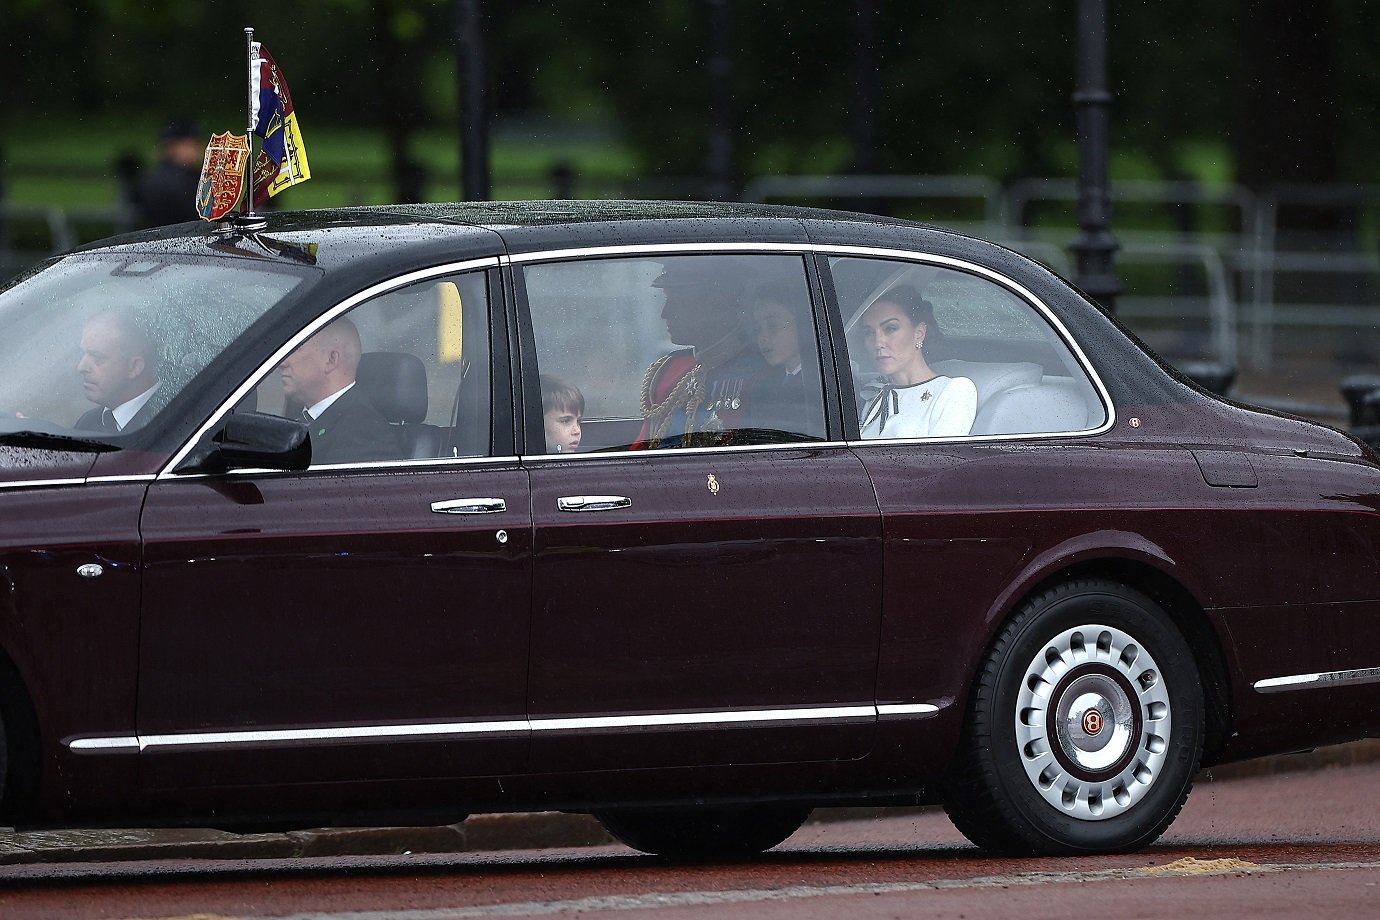 Britain's Catherine, Princess of Wales, (R) arrives with Britain's Prince William, Prince of Wales, (rear 3rdR) and their children Britain's Prince George of Wales (2ndR) and Britain's Prince Louis of Wales (C) to Buckingham Palace before the King's Birthday Parade "Trooping the Colour" in London on June 15, 2024. Catherine, Princess of Wales, is making a tentative return to public life for the first time since being diagnosed with cancer, attending the Trooping the Colour military parade in central London. (Photo by HENRY NICHOLLS / AFP)